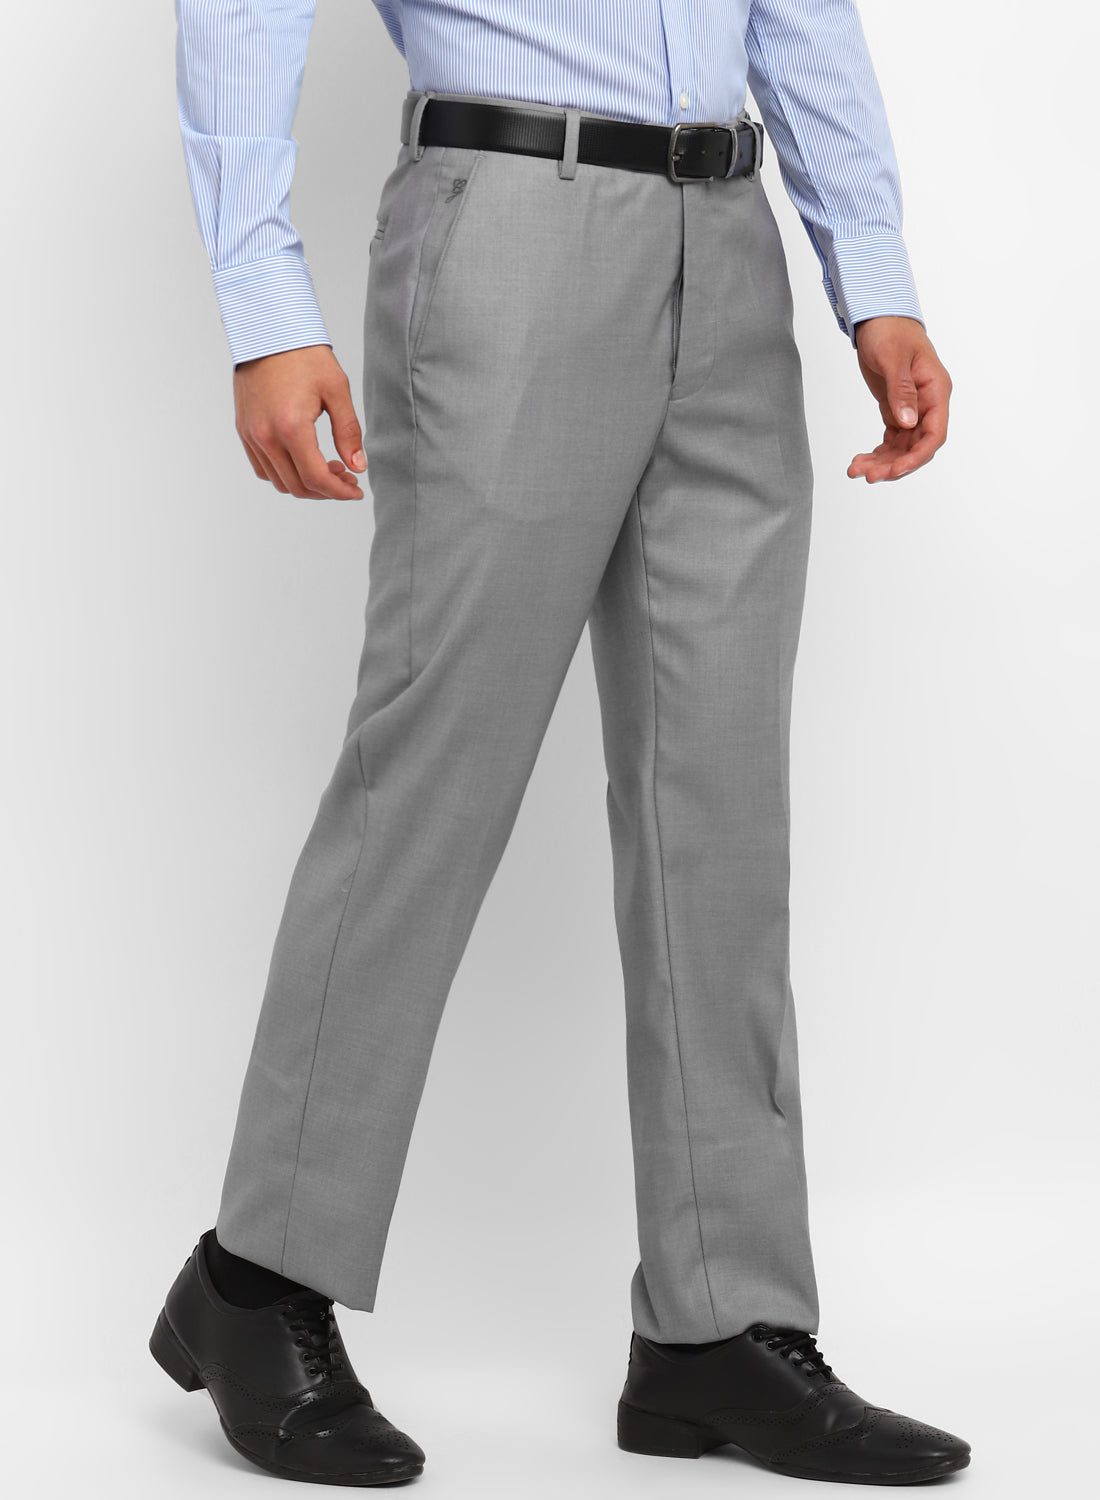 Buy D novo Men's Regular Formal Trouser | Stylish Fit Men Wear Pants for  Office or Party | Men's Fashion Dress Trousers Pant Light Grey at Amazon.in